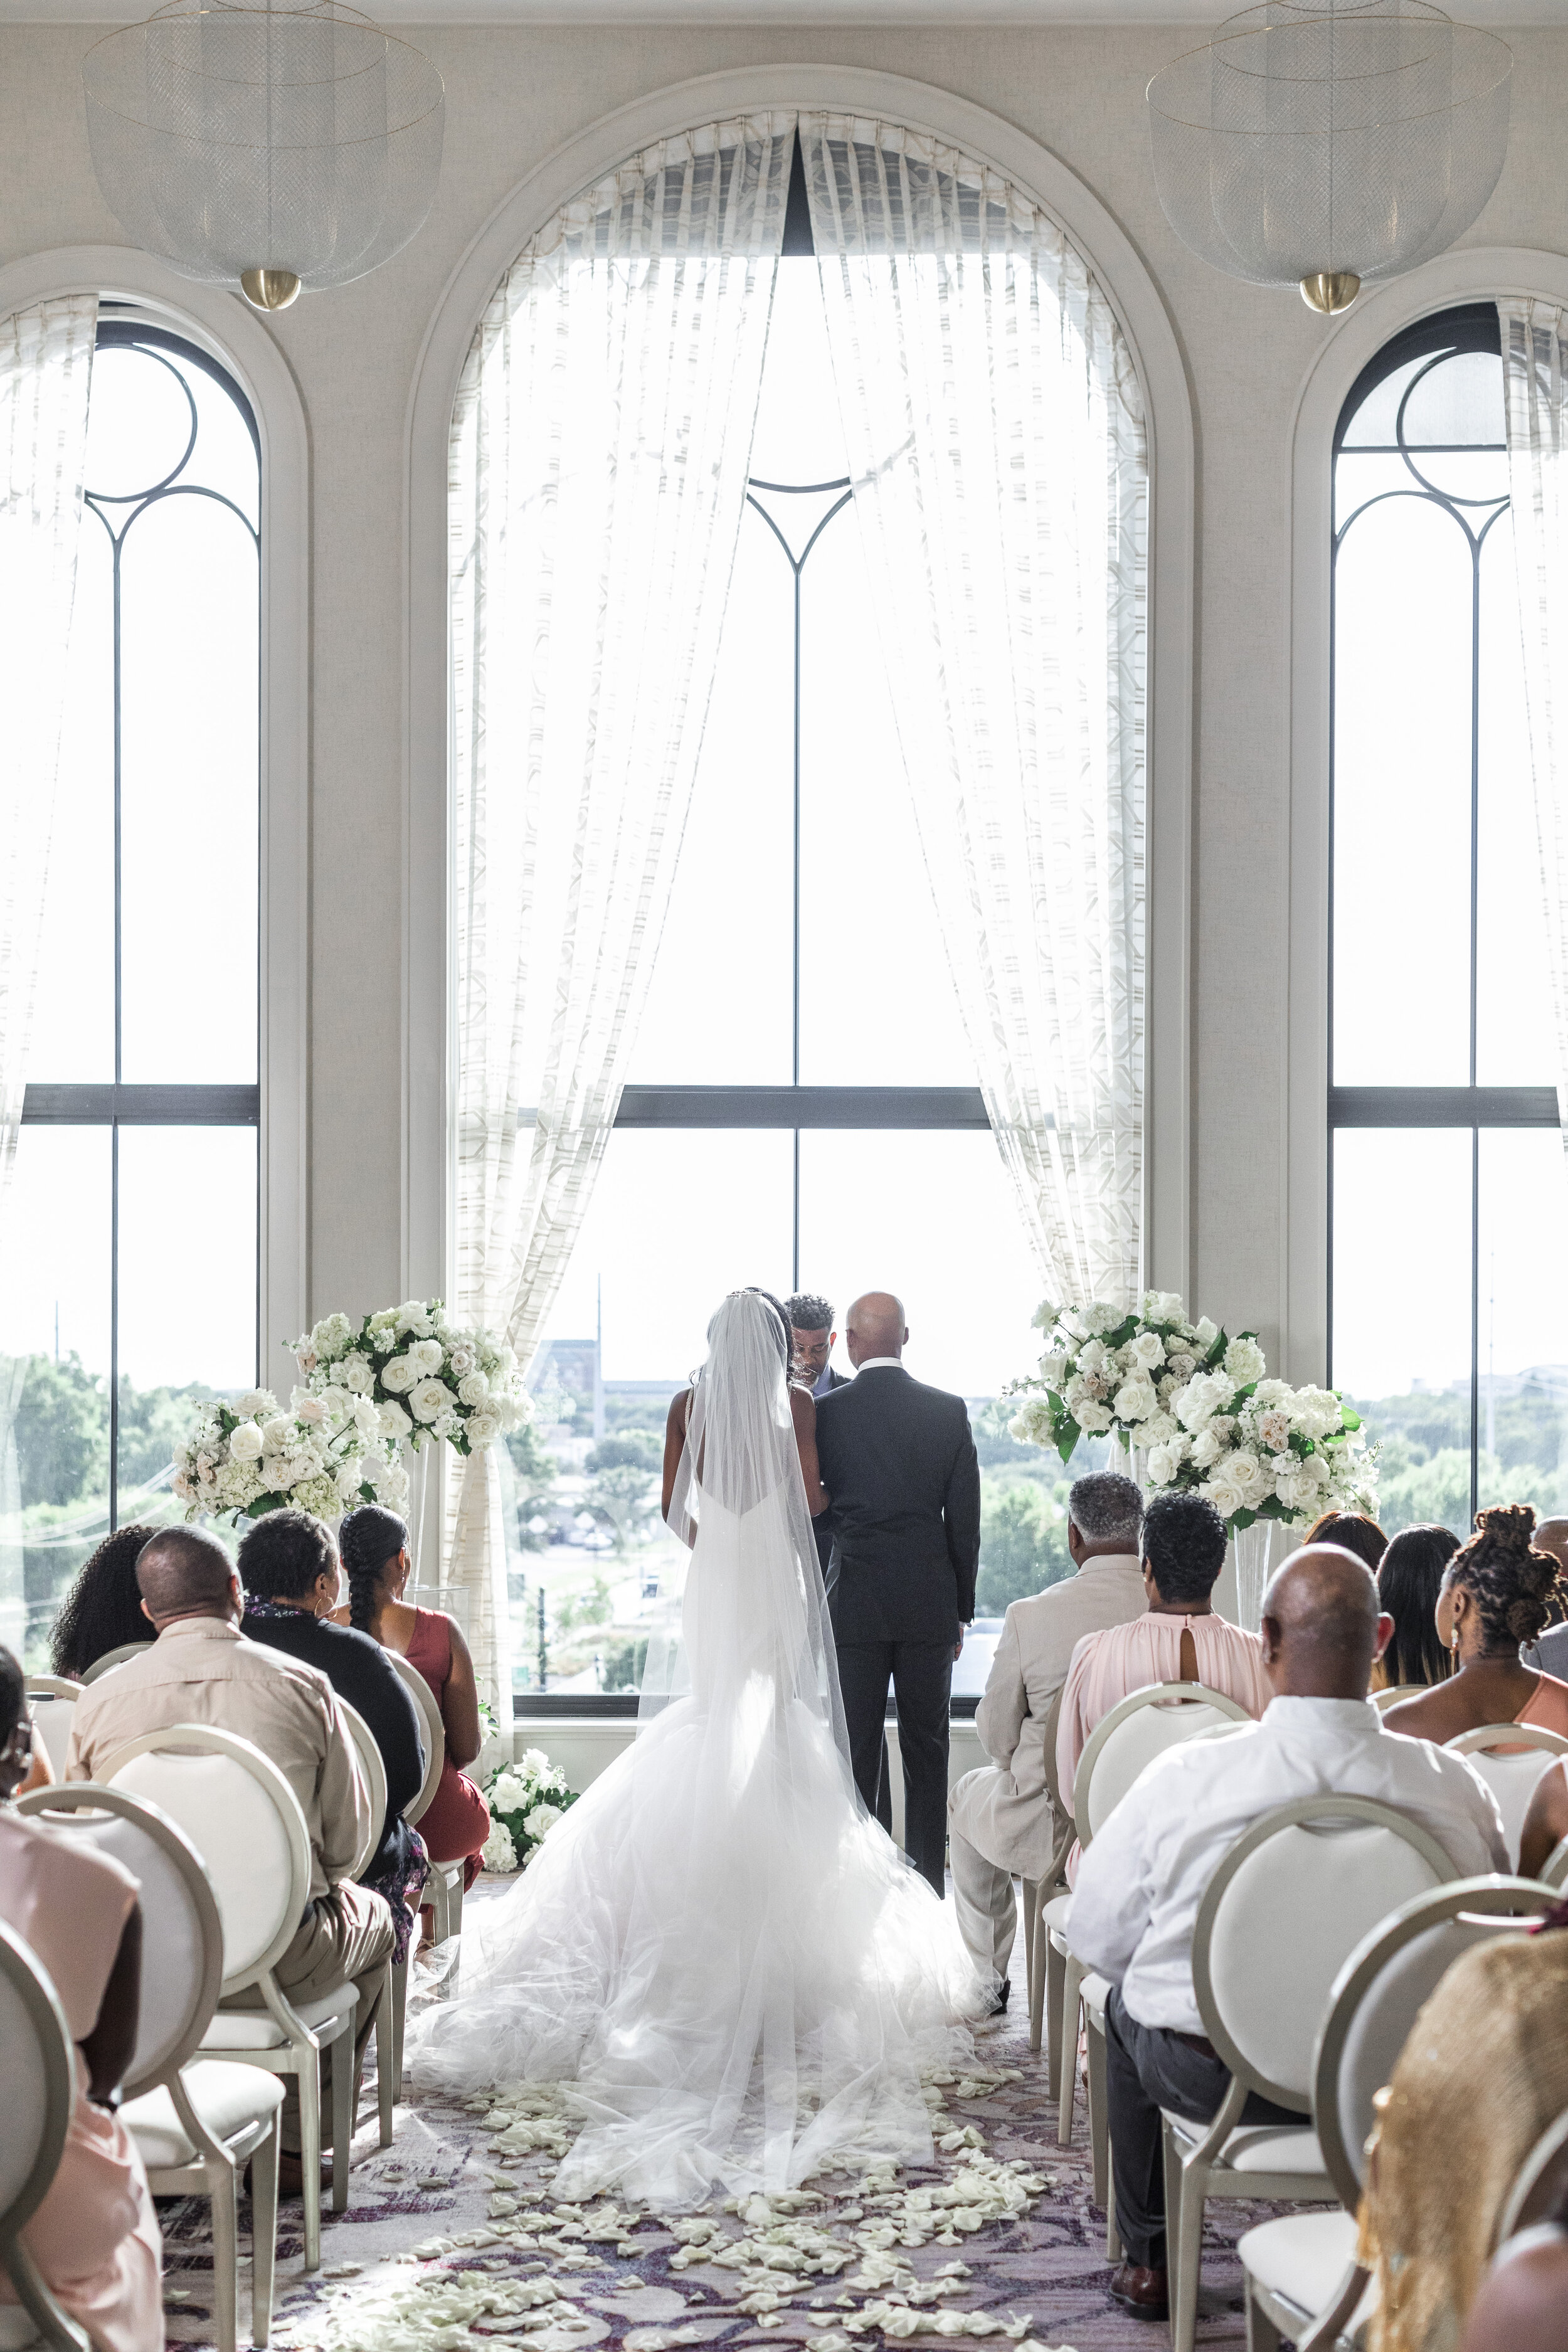  A bride and groom stand at the alter in an elegant indoor wedding venue in Texas. Natural light photography dallas texas wedding venue high end wedding photography wedding dress inspiration white wedding flowers bride and groom wedding ceremony idea